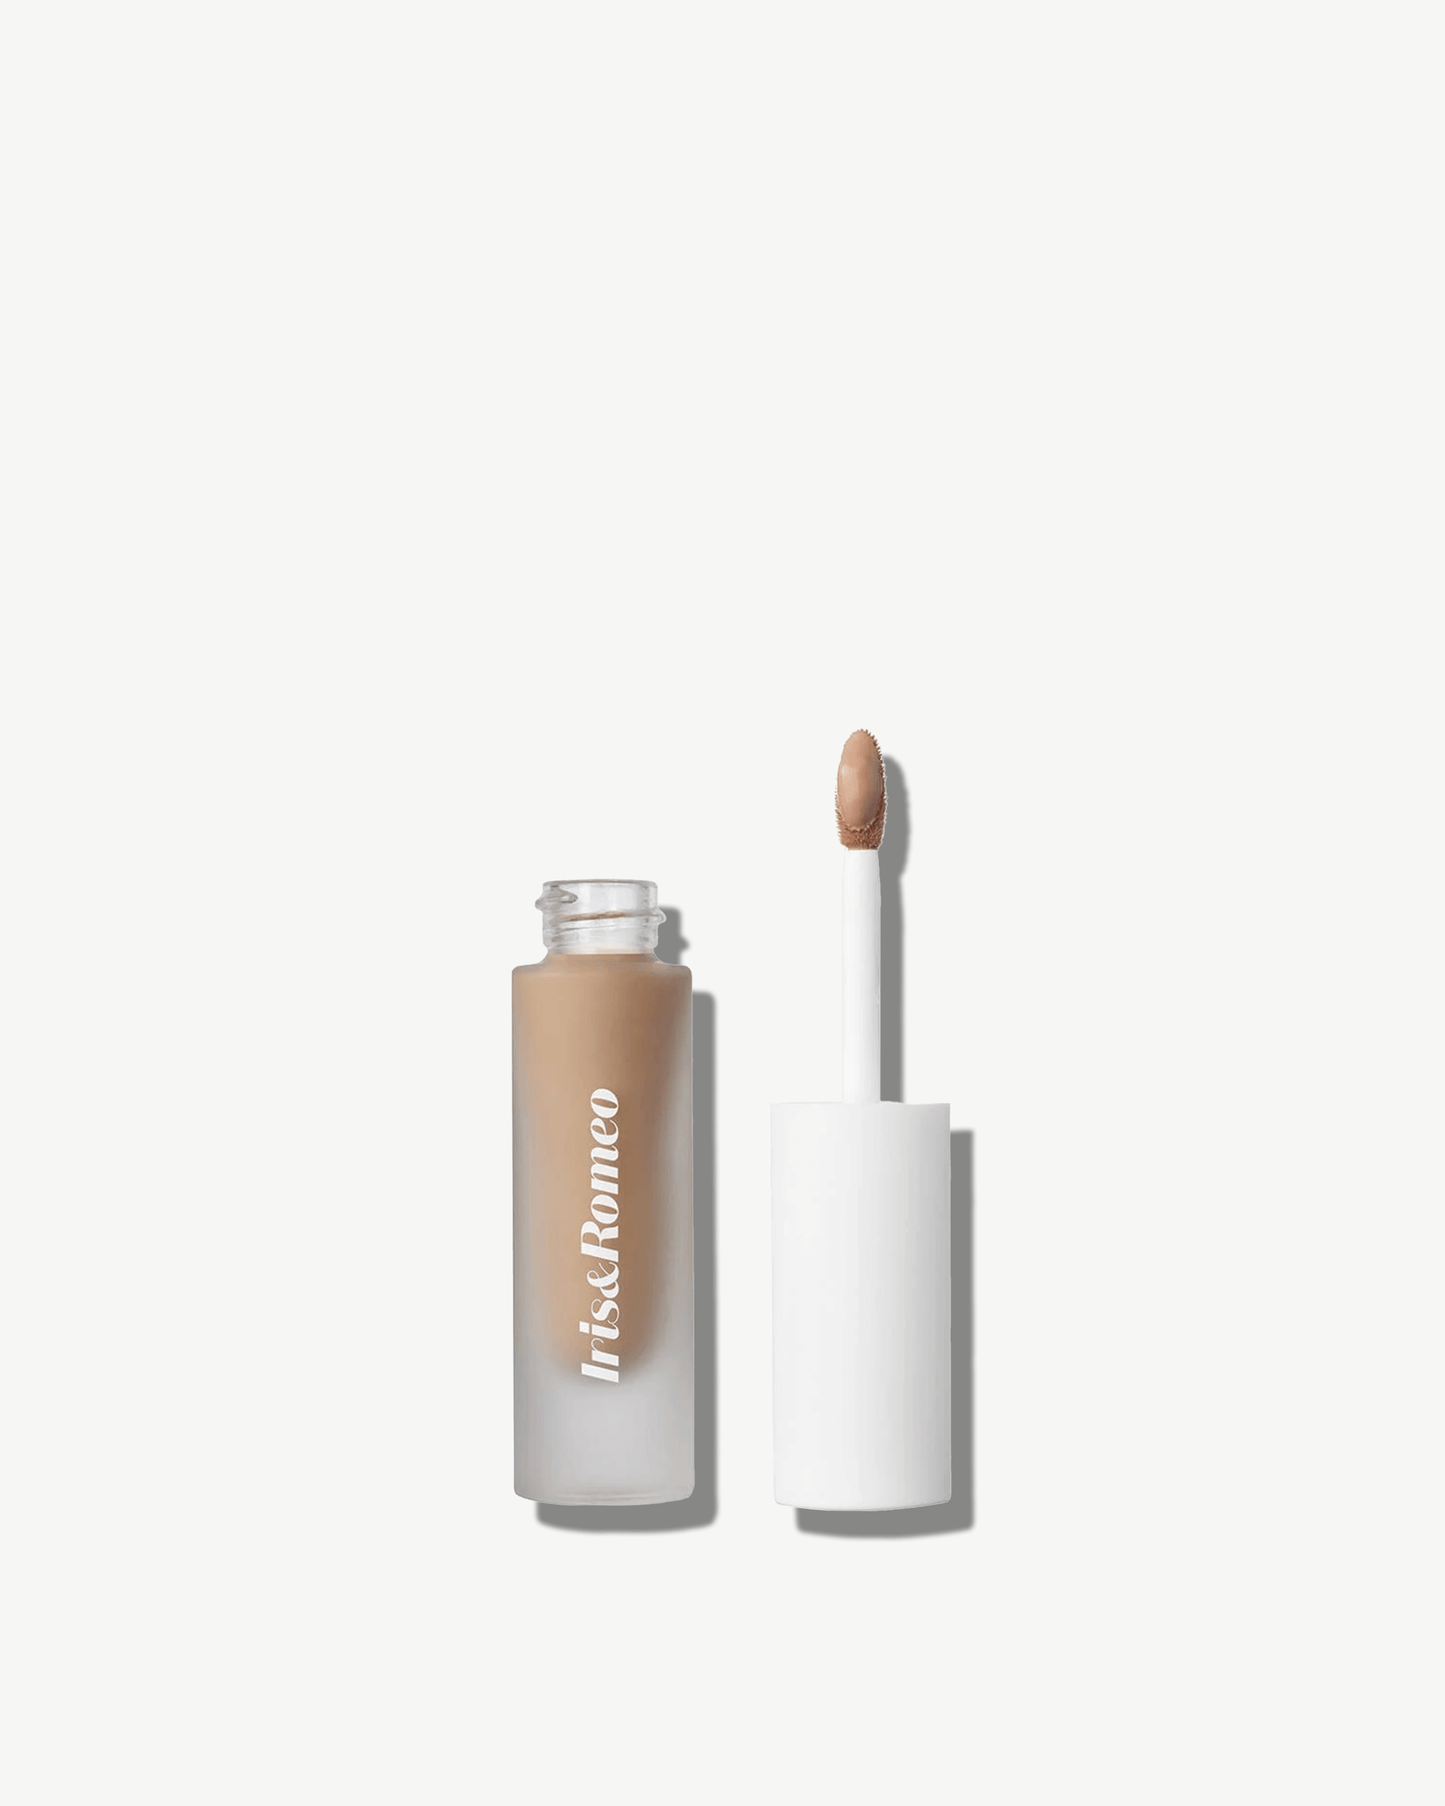 Shade 4 (for light skin tones with neutral undertones)